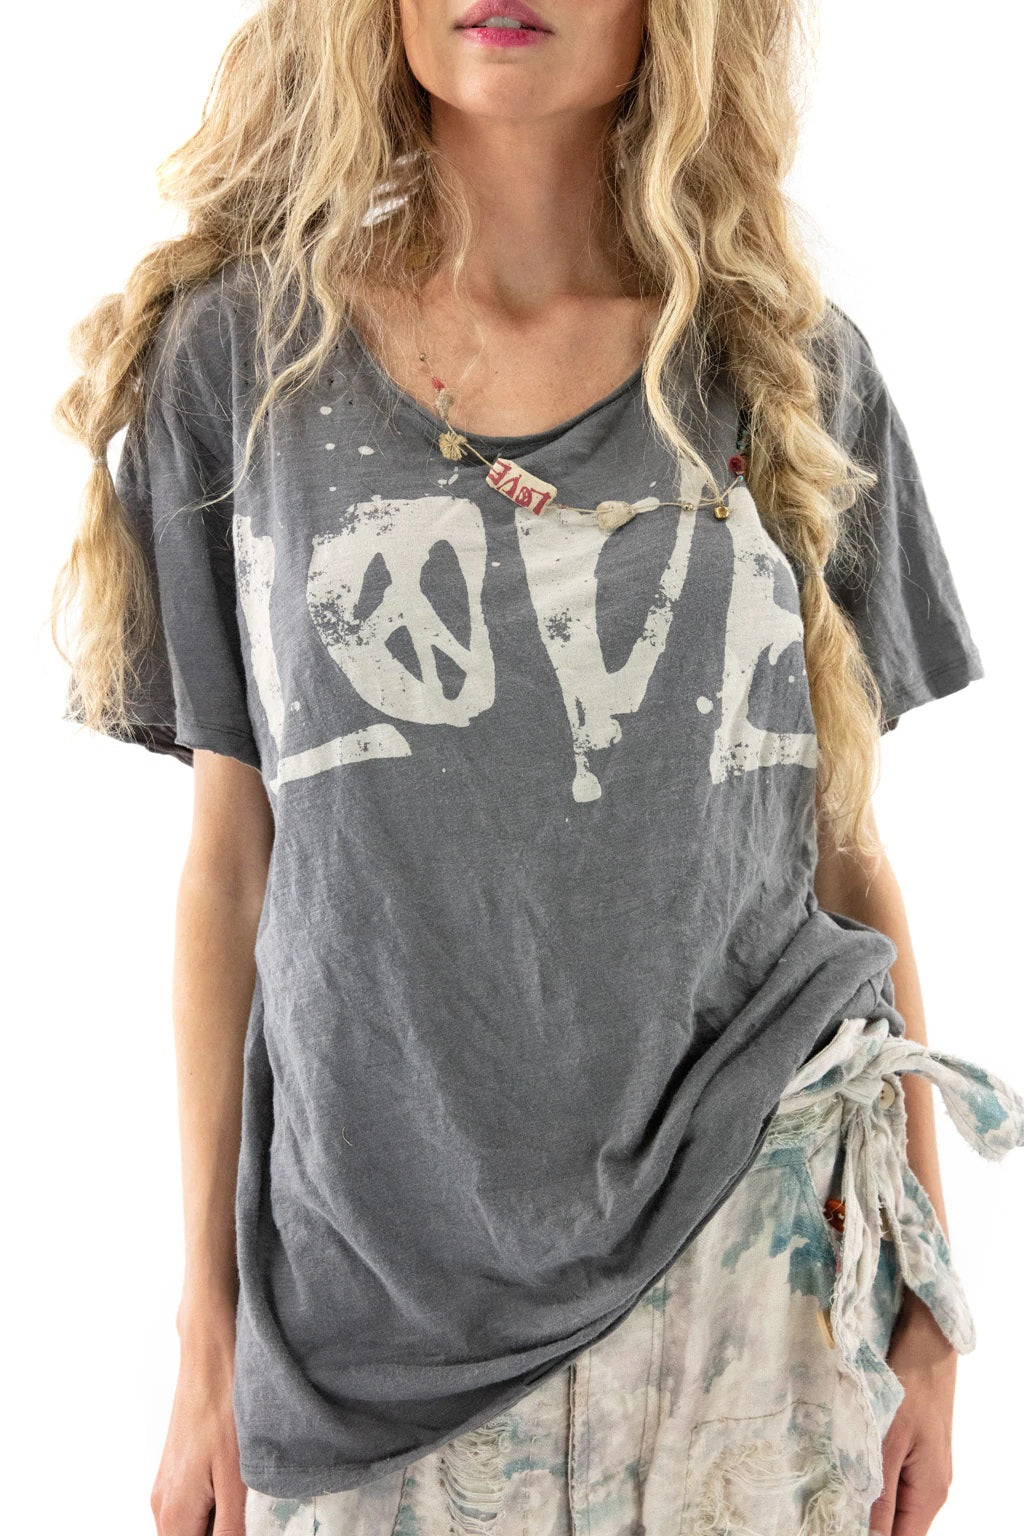 LOVE WILL TEACH TEE - Kingfisher Road - Online Boutique